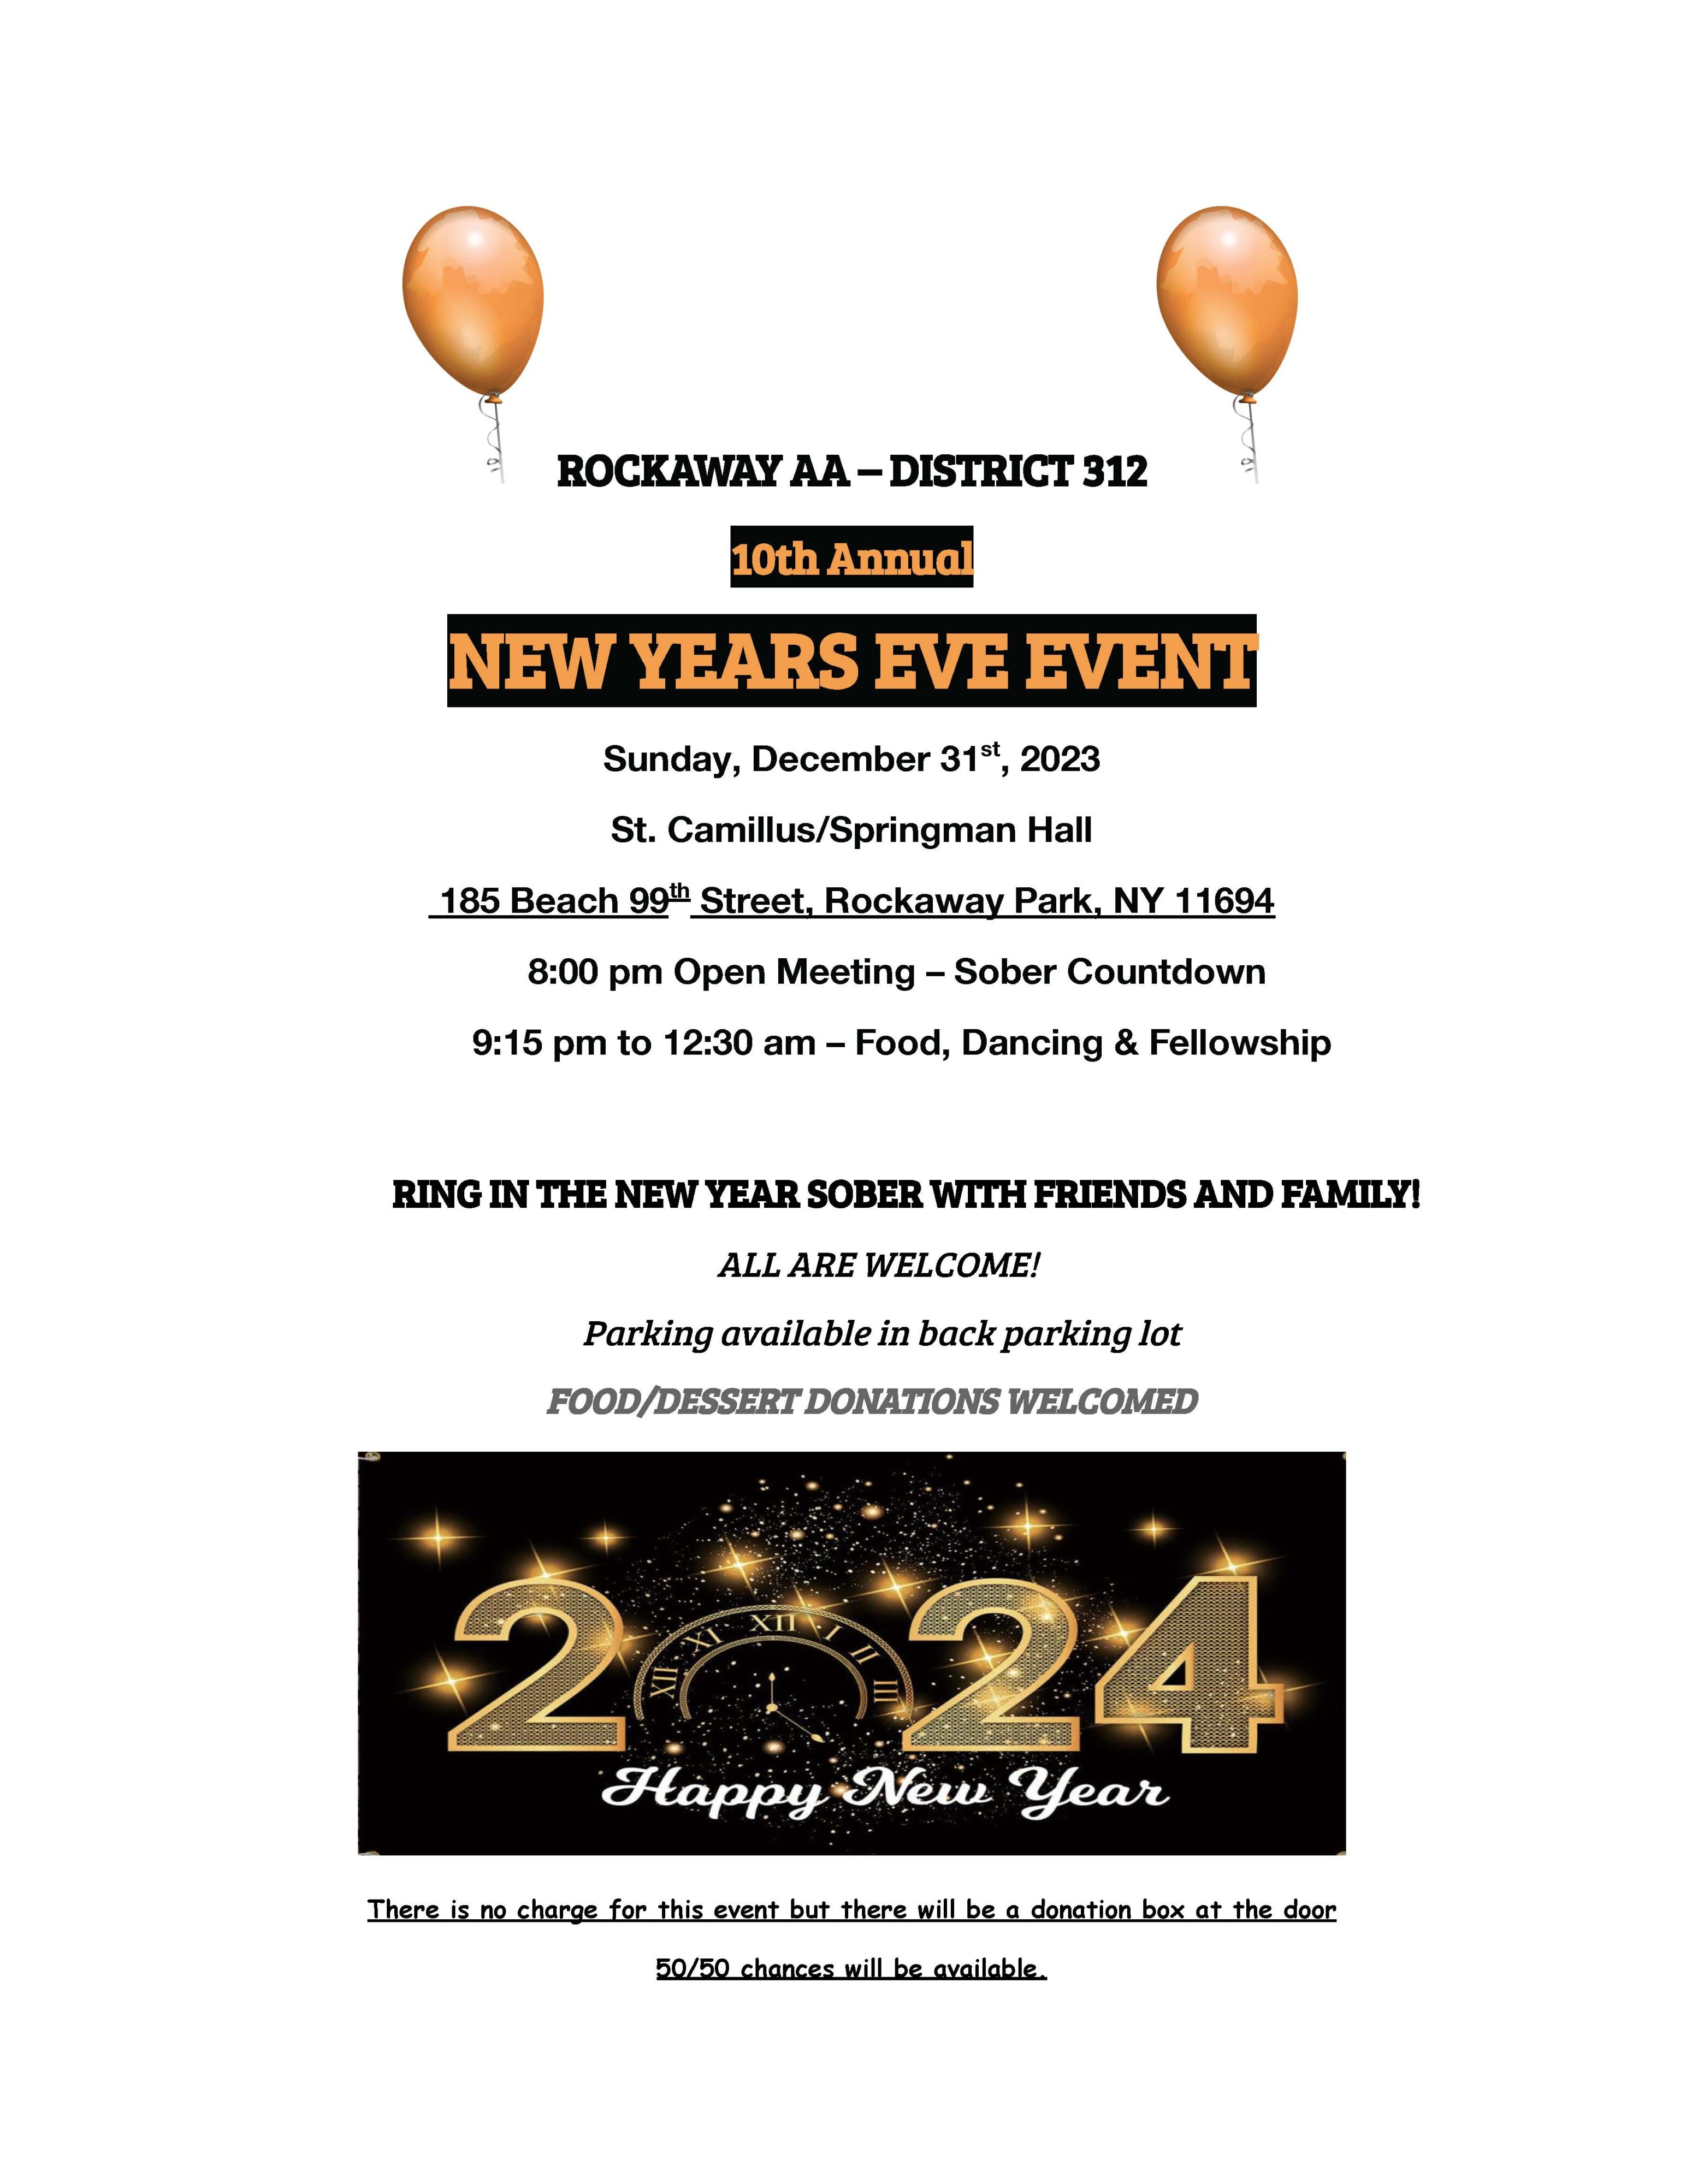 New Year's Eve Open Meeting with Food, Dancing and Fellowship @ St. Camillus/Springman Hall